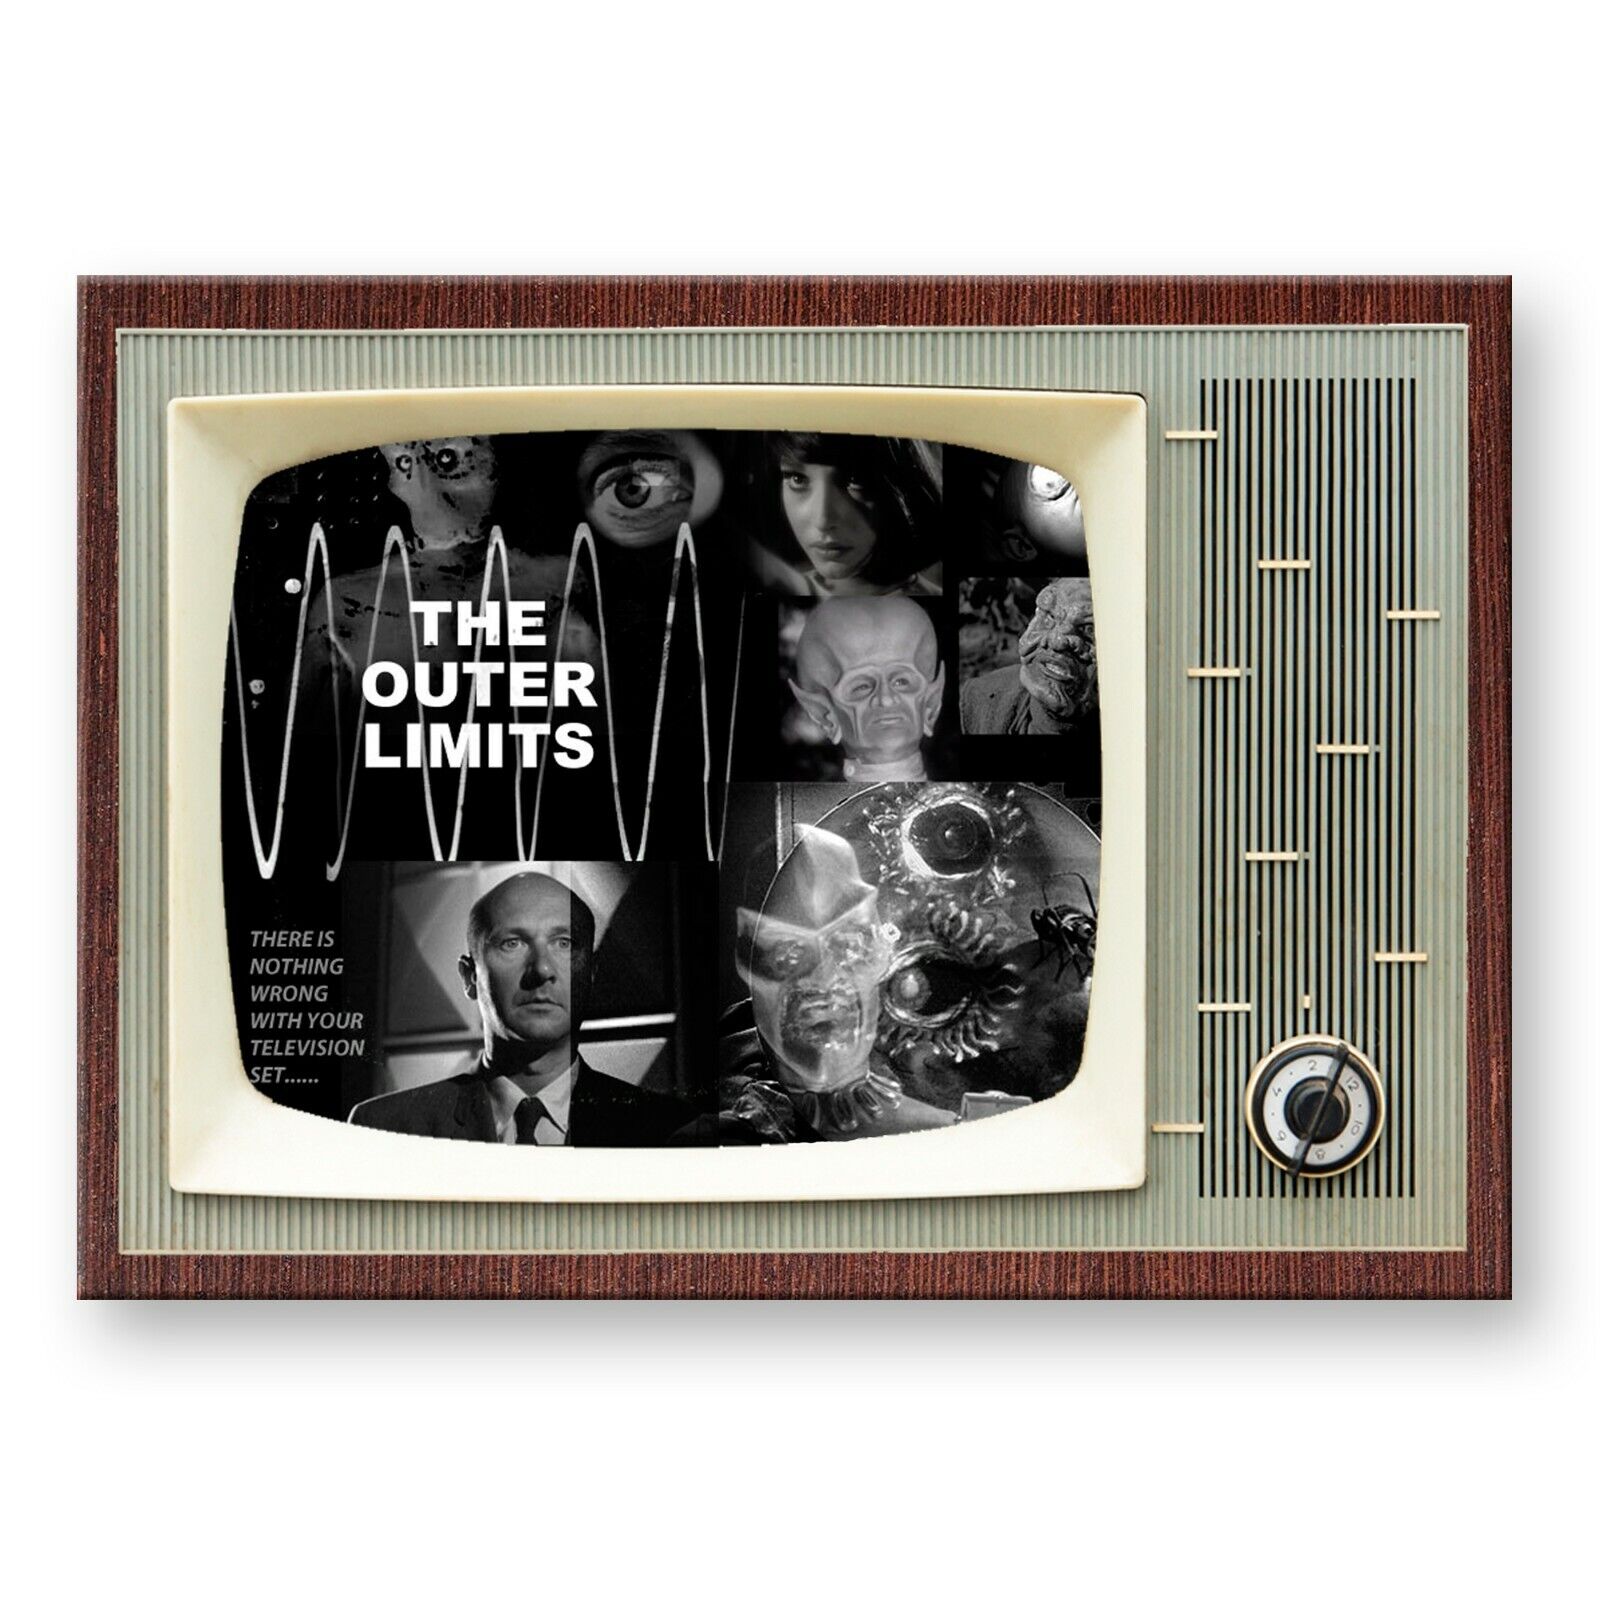 THE OUTER LIMITS TV Show Classic TV 3.5 inches x 2.5 inches FRIDGE MAGNET